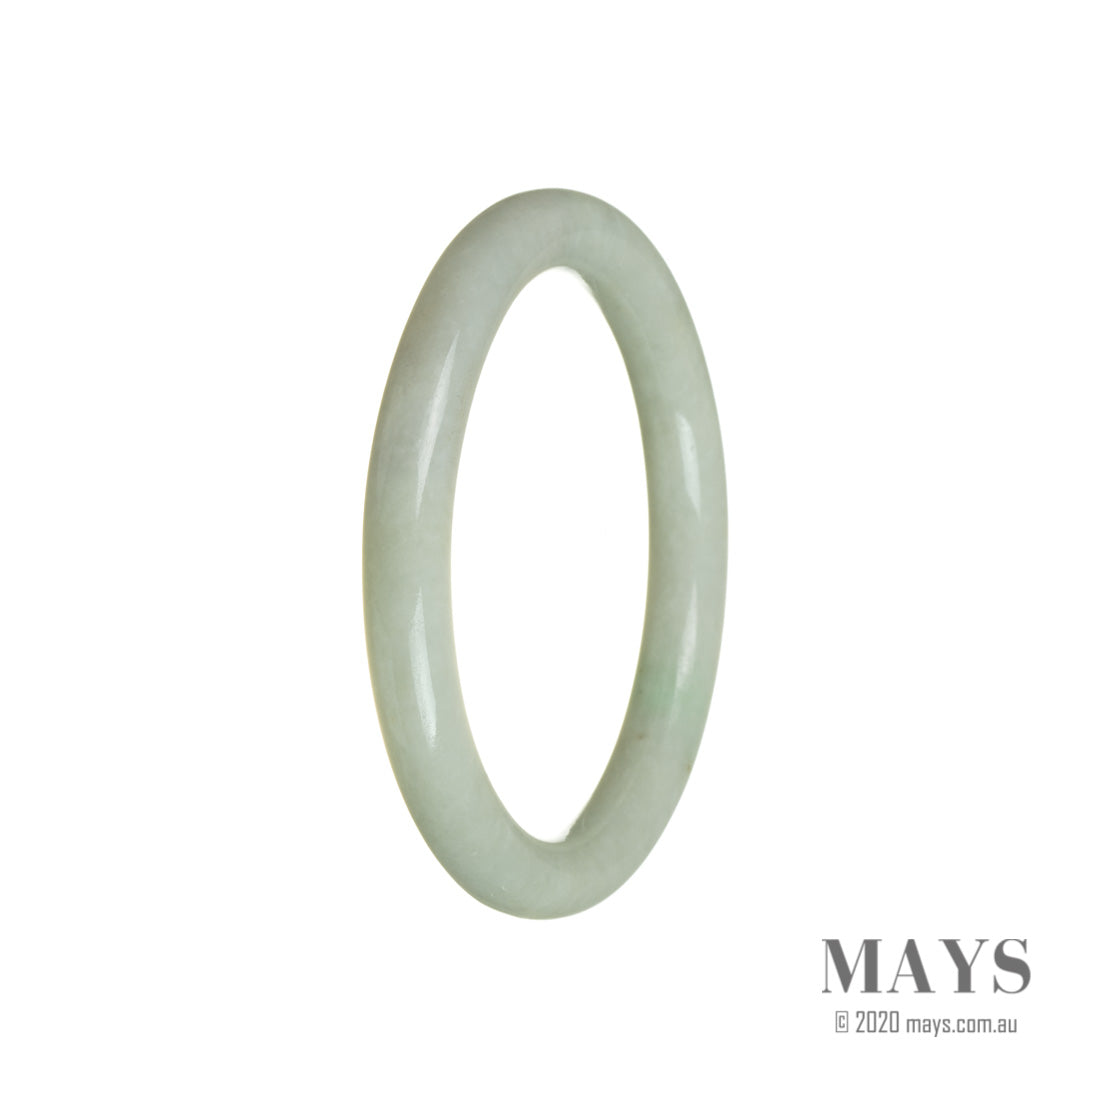 A close-up photo of a genuine untreated pale green jade bangle bracelet. The oval-shaped bracelet has a 58mm diameter and features a smooth and polished surface. The pale green color of the jade is soothing and elegant. The bracelet is of high quality and is made by MAYS™.